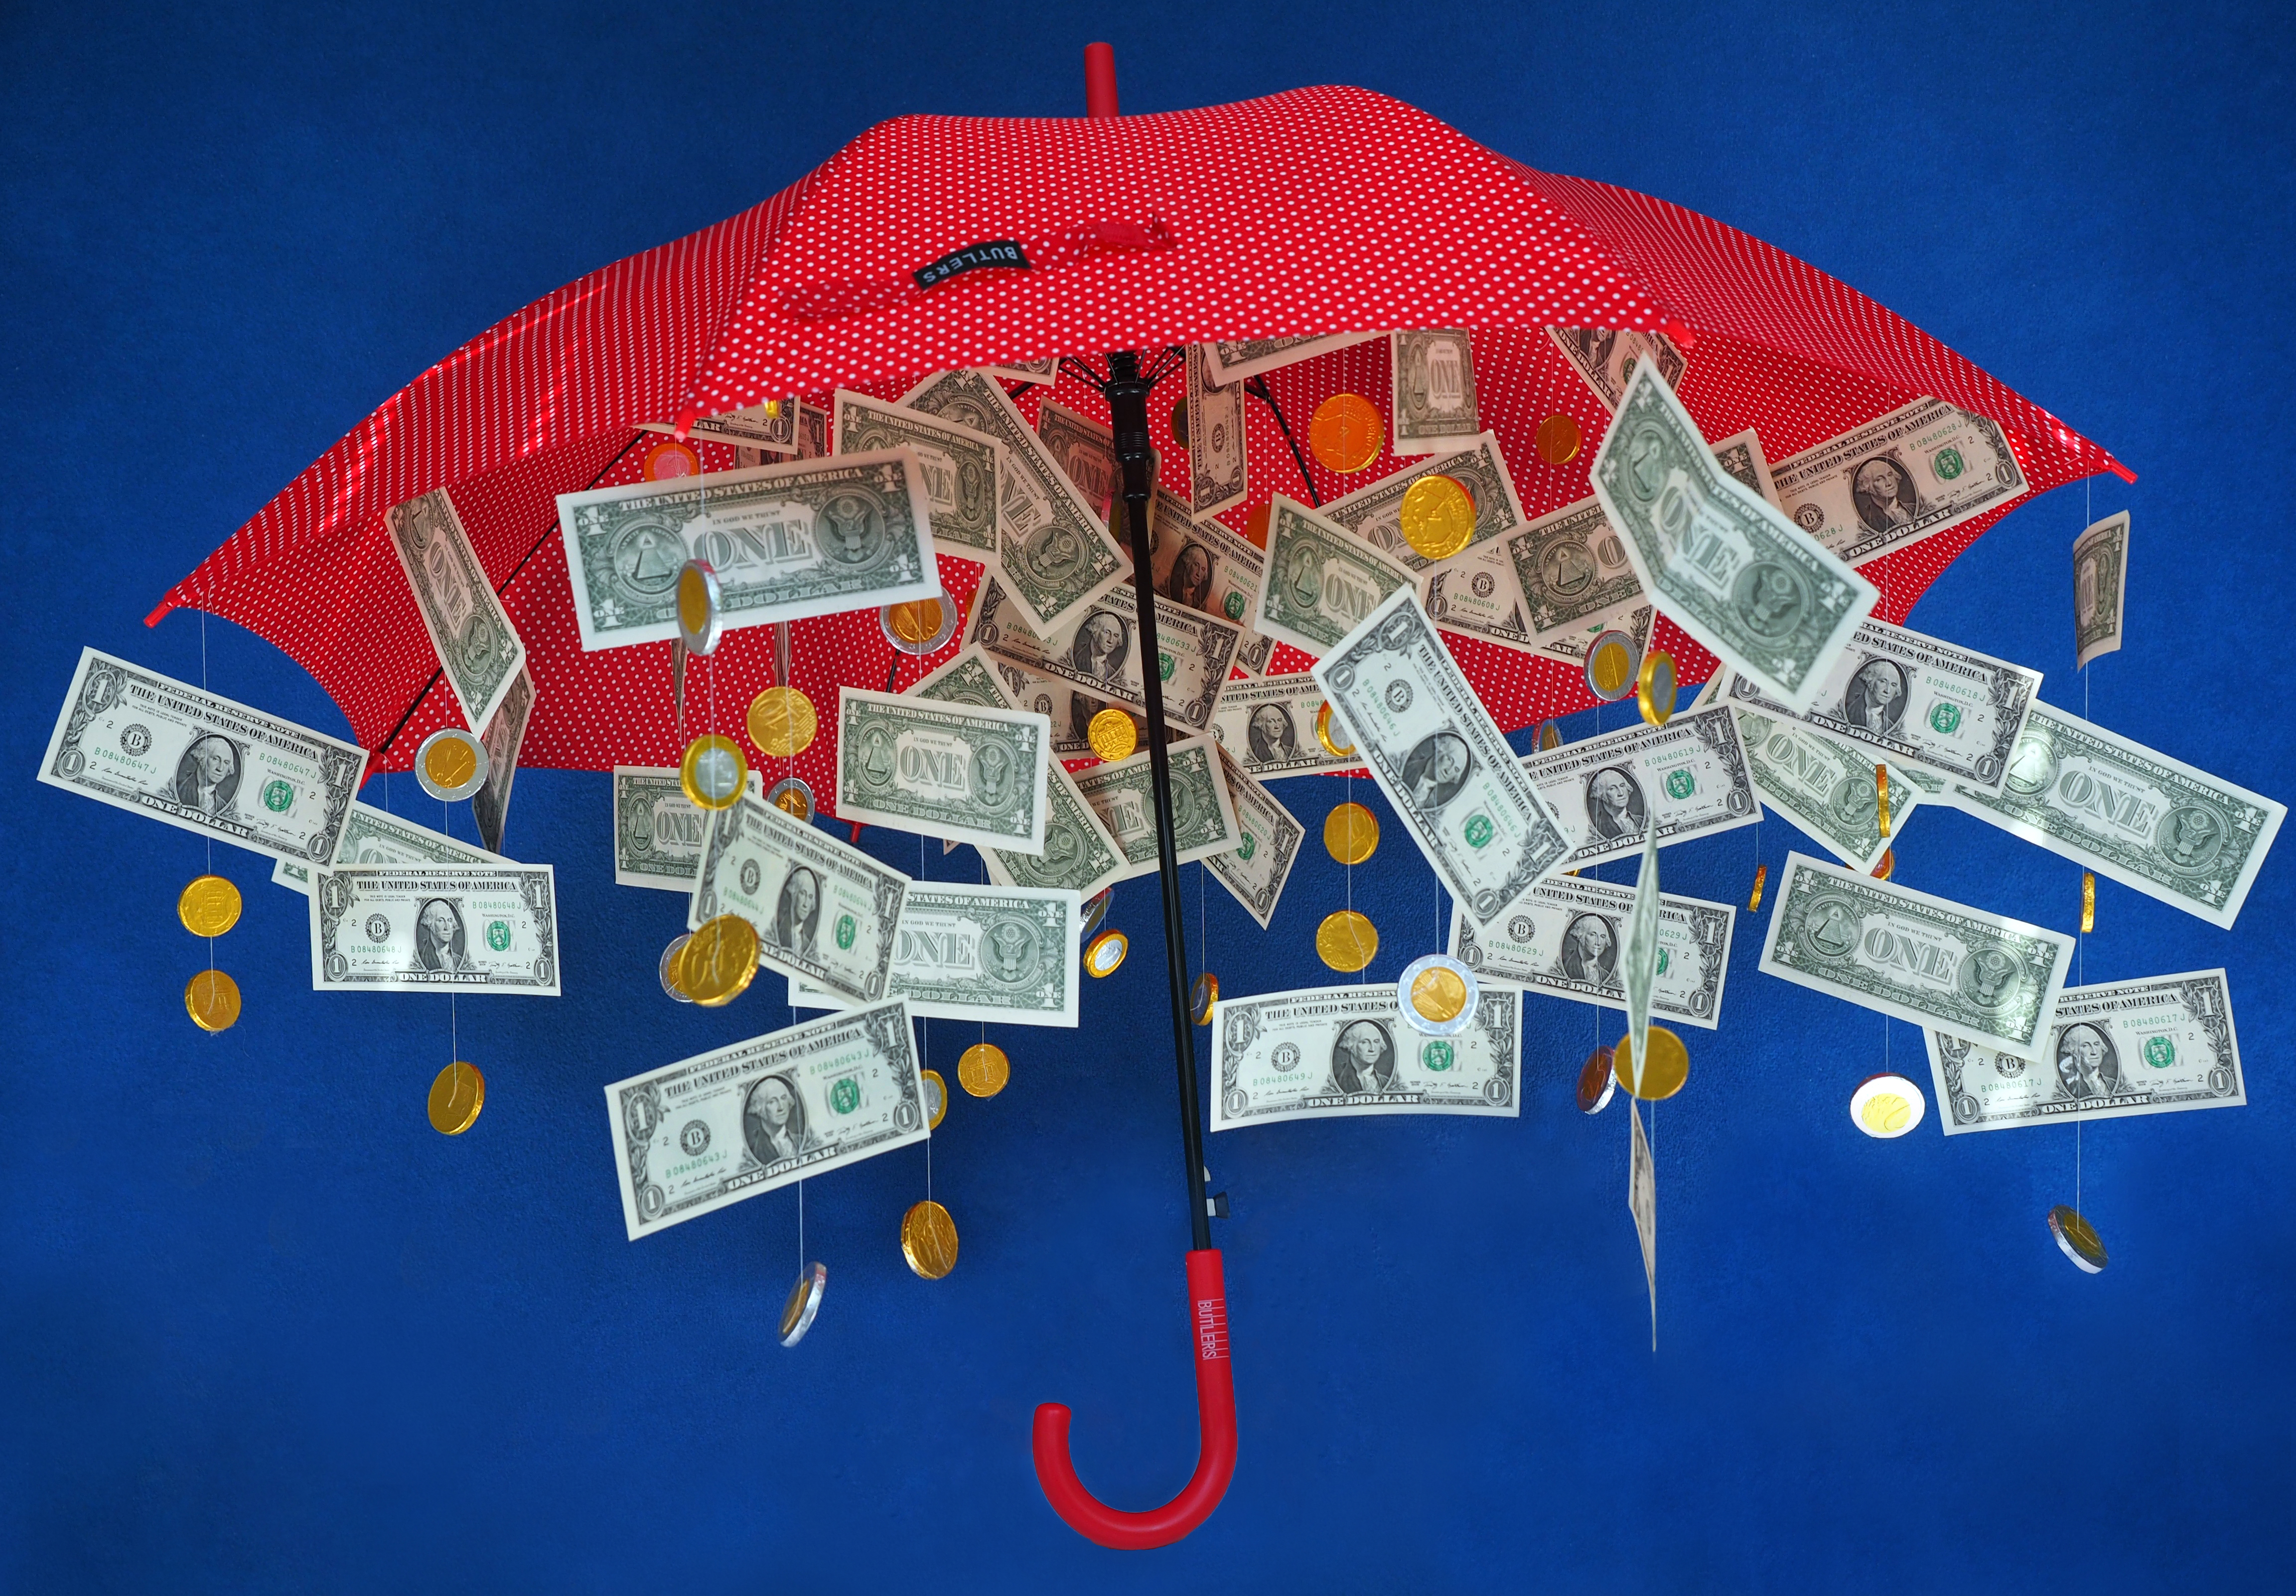 The General Council on Finance and Administration board has formed a new Reserves Task Force to examine just how much general church funds should save for a rainy day. Photo illustration by Hans Braxmeier, courtesy of Pixabay; adapted by UMNS.